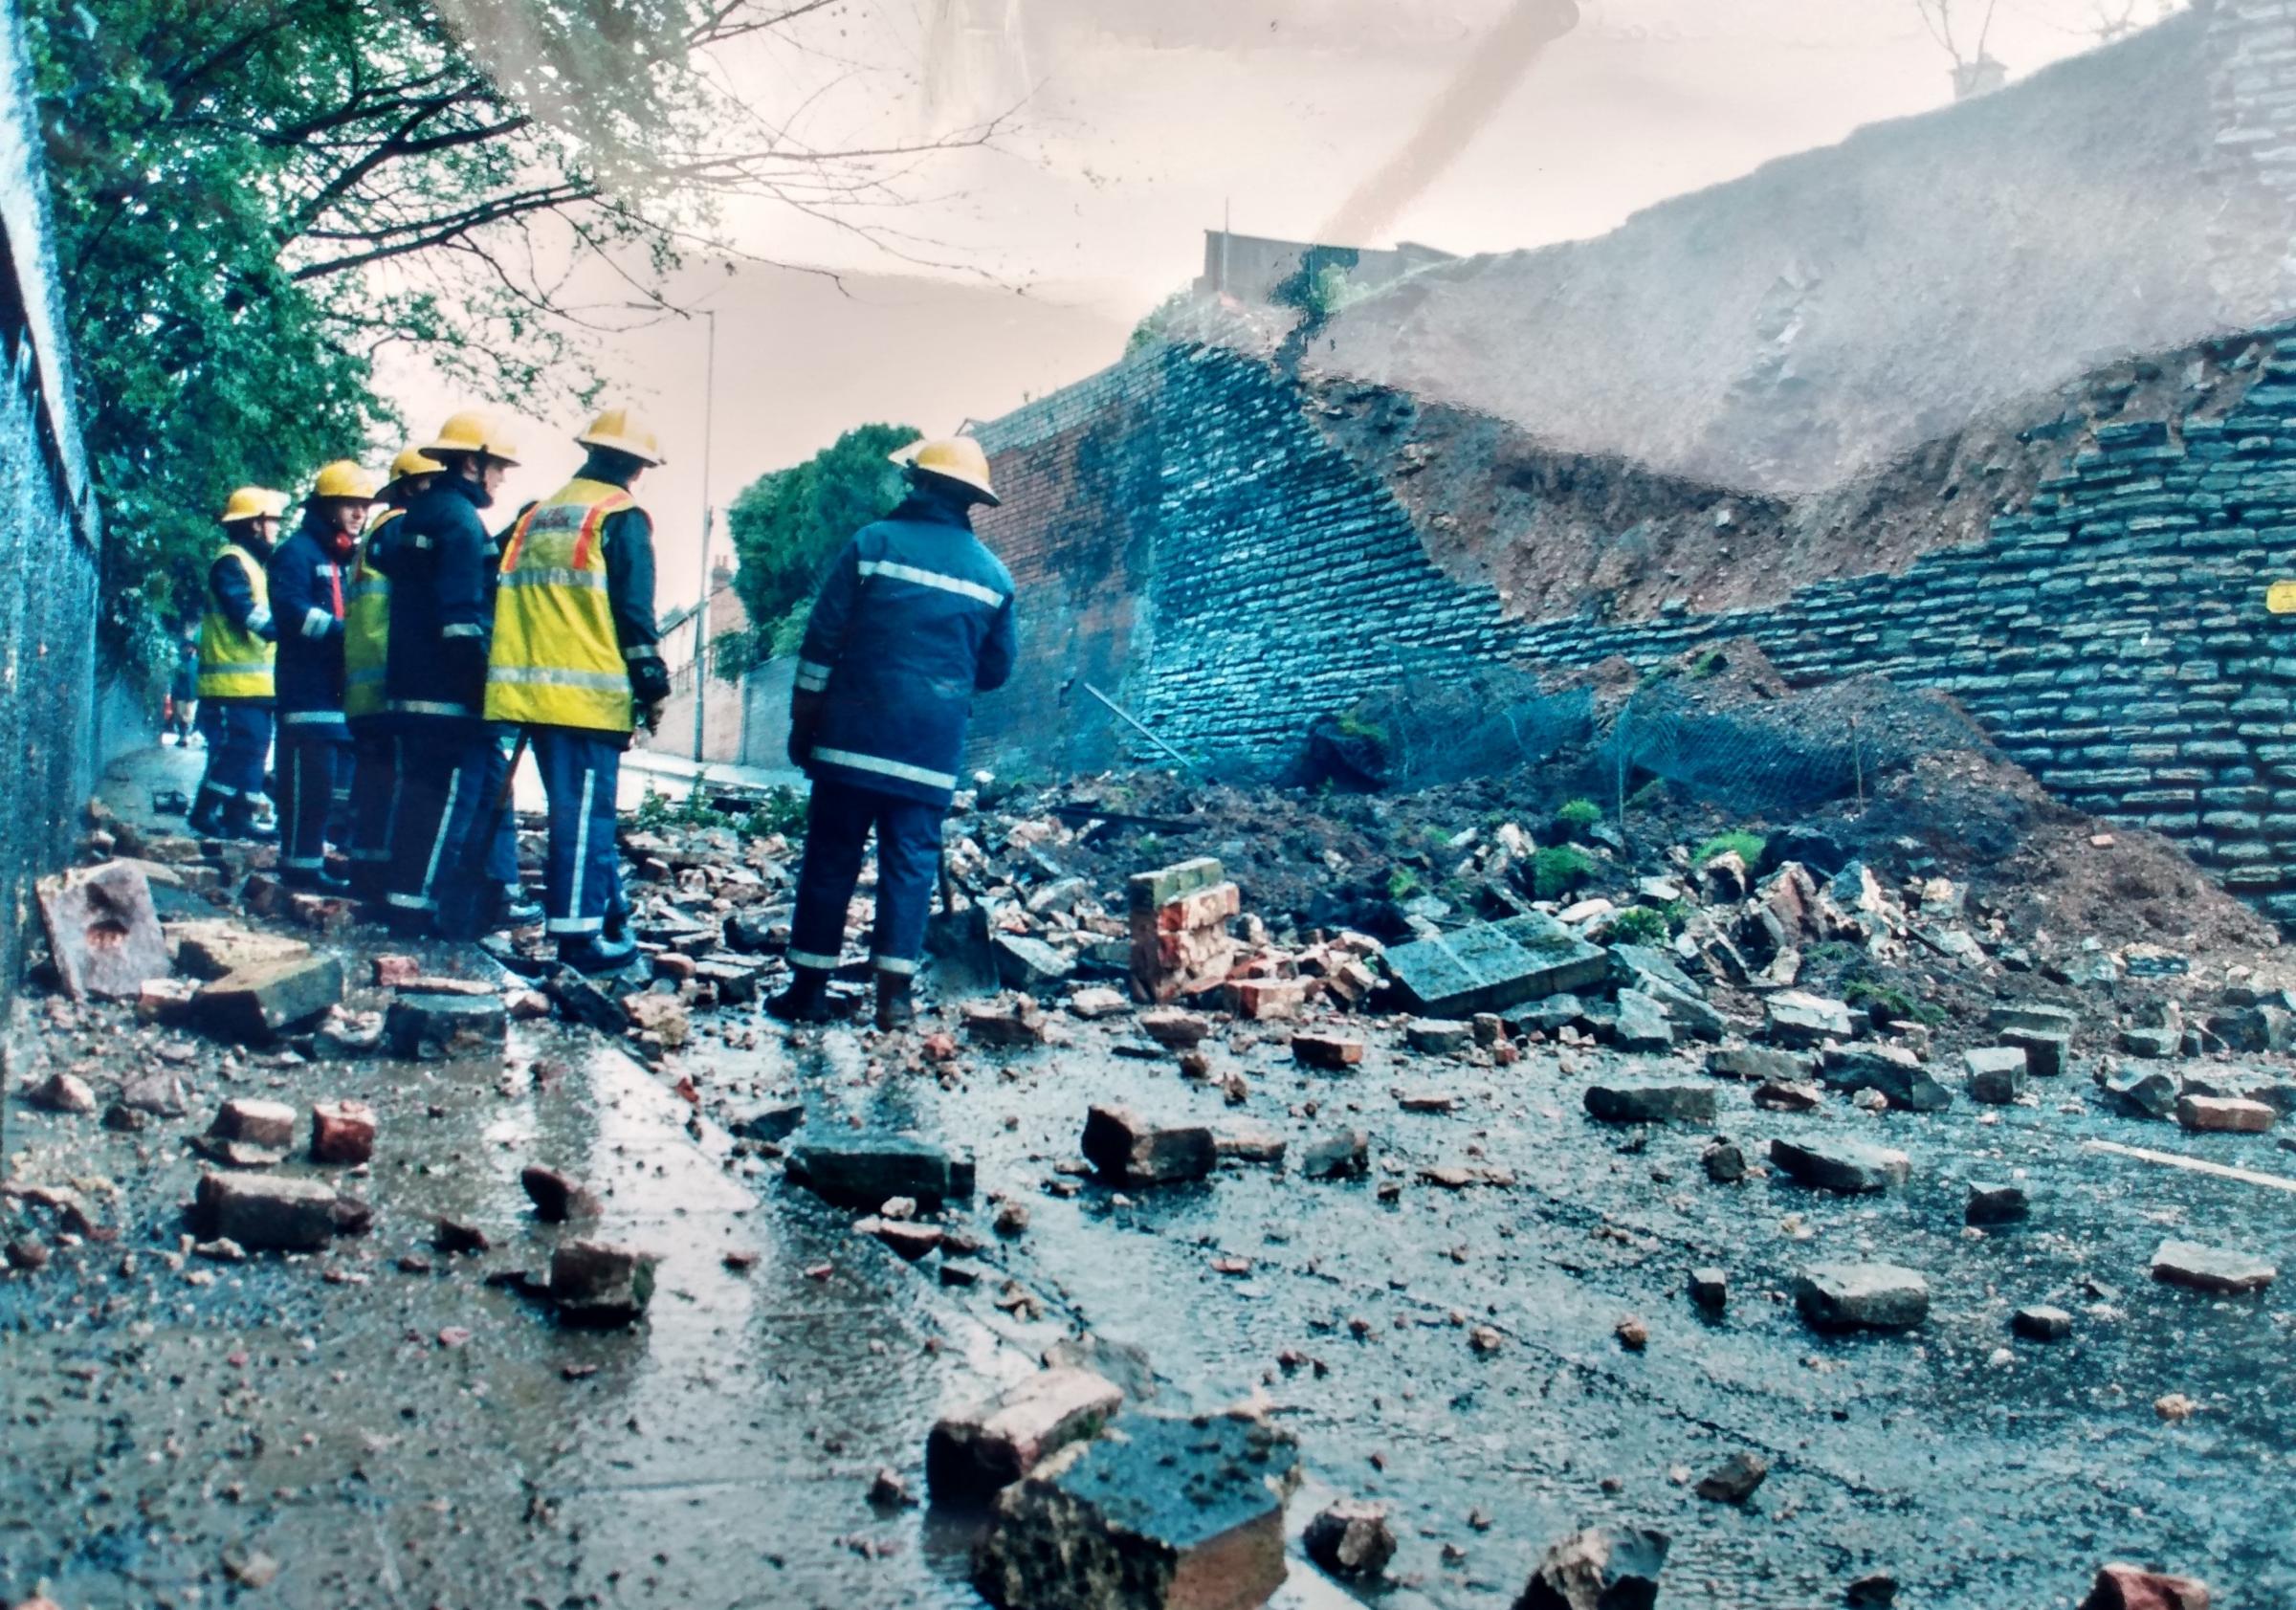 April 1998 and one of the most dramatic recent events was a consequence of the Easter floods when a 20ft wall that formed the boundary to the garden of a house came crashing down across the road. Firefighters initially feared someone had been trapped